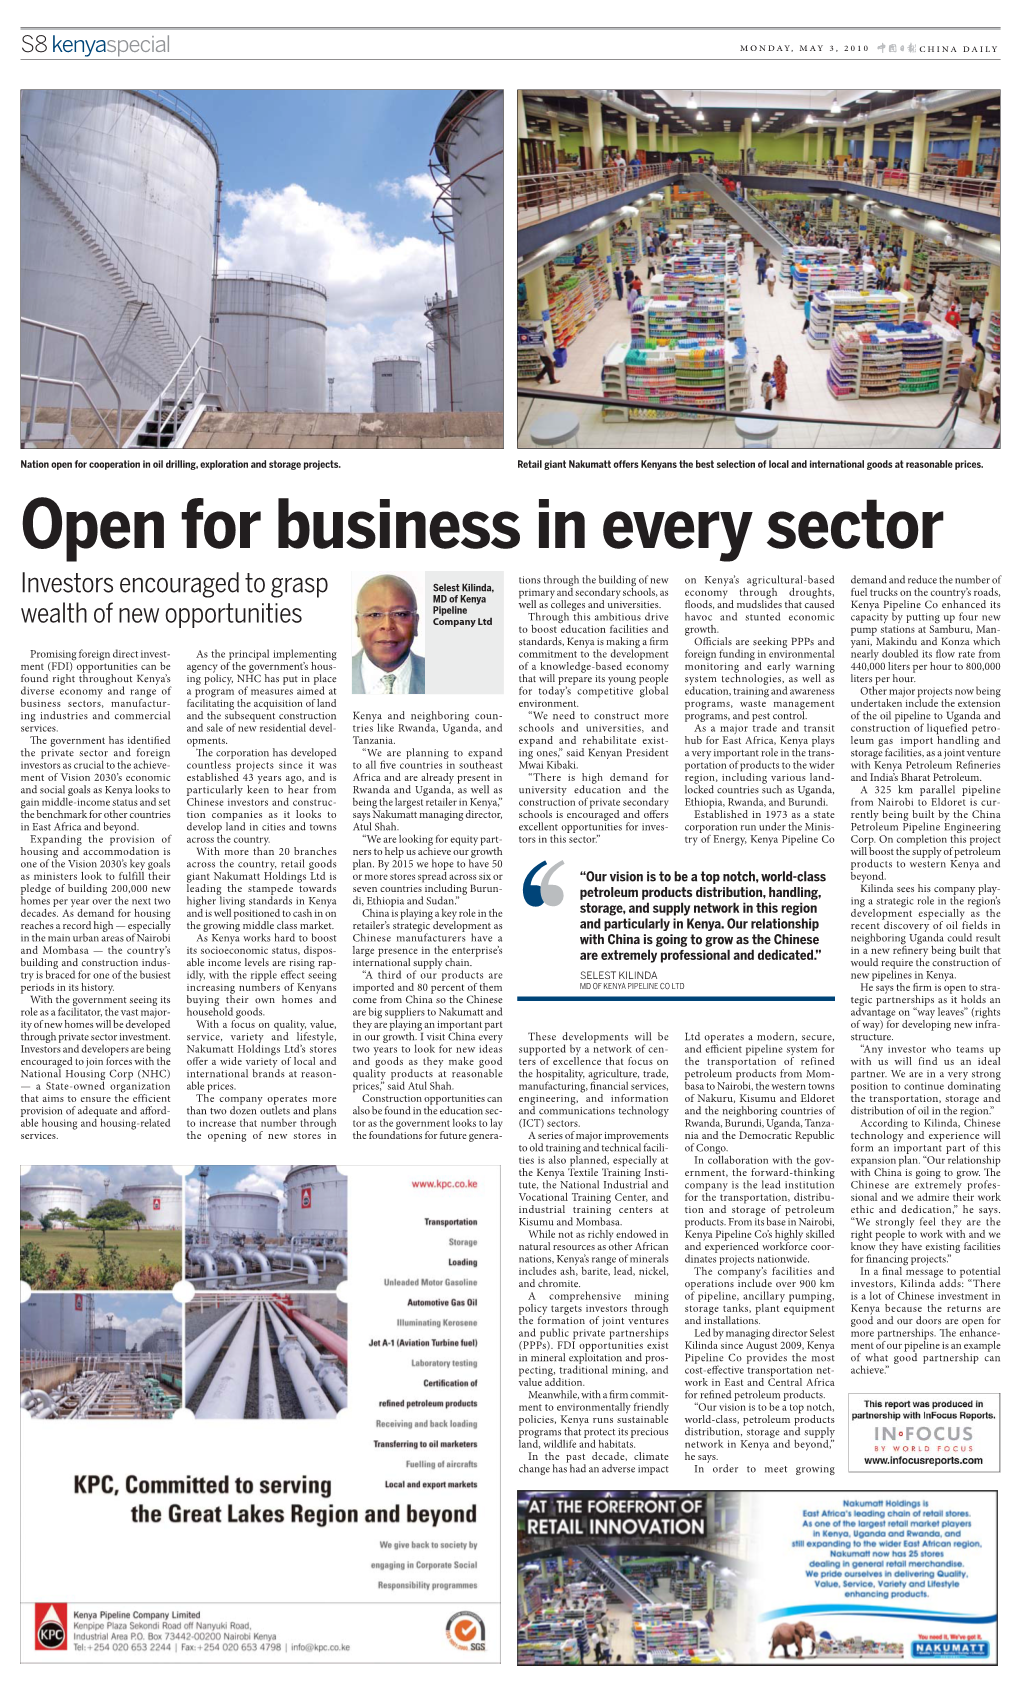 Open for Business in Every Sector